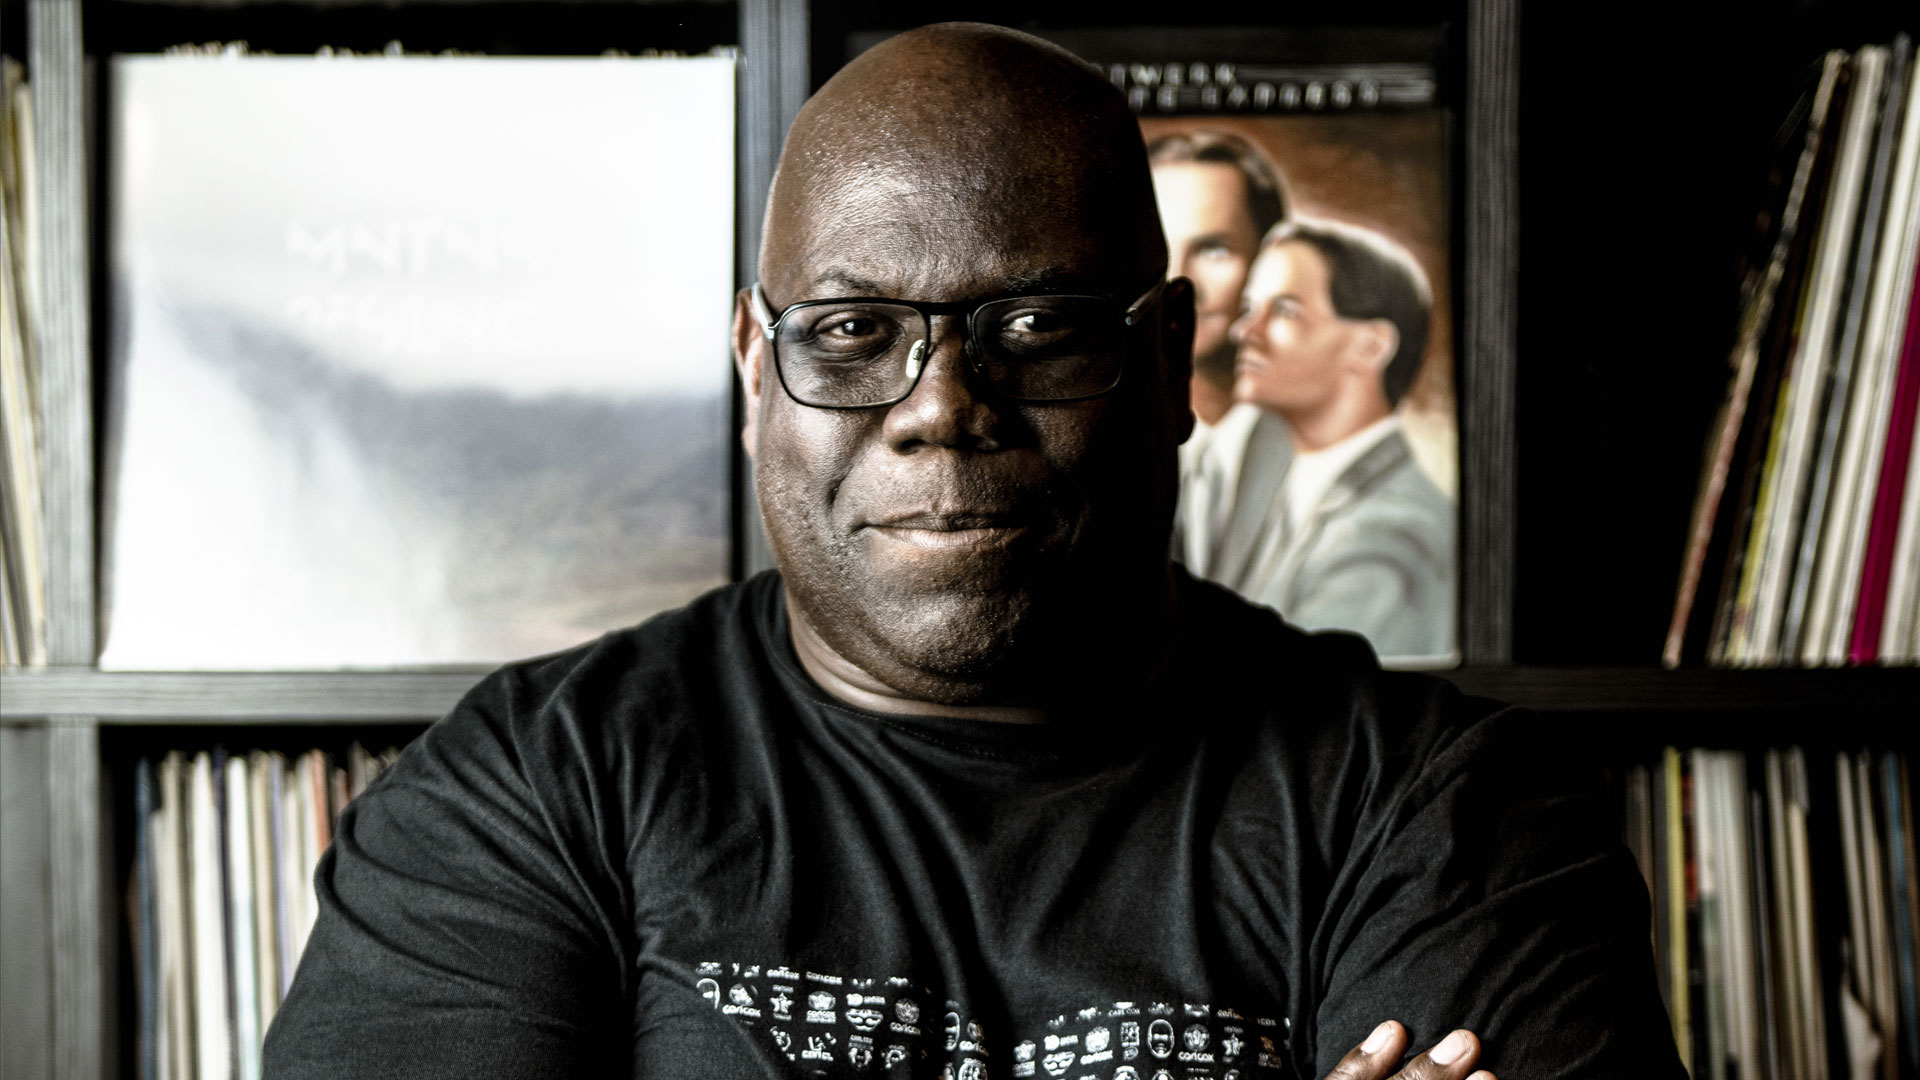 English DJ & Producer and techno legend Carl Cox will release his next album on BMG